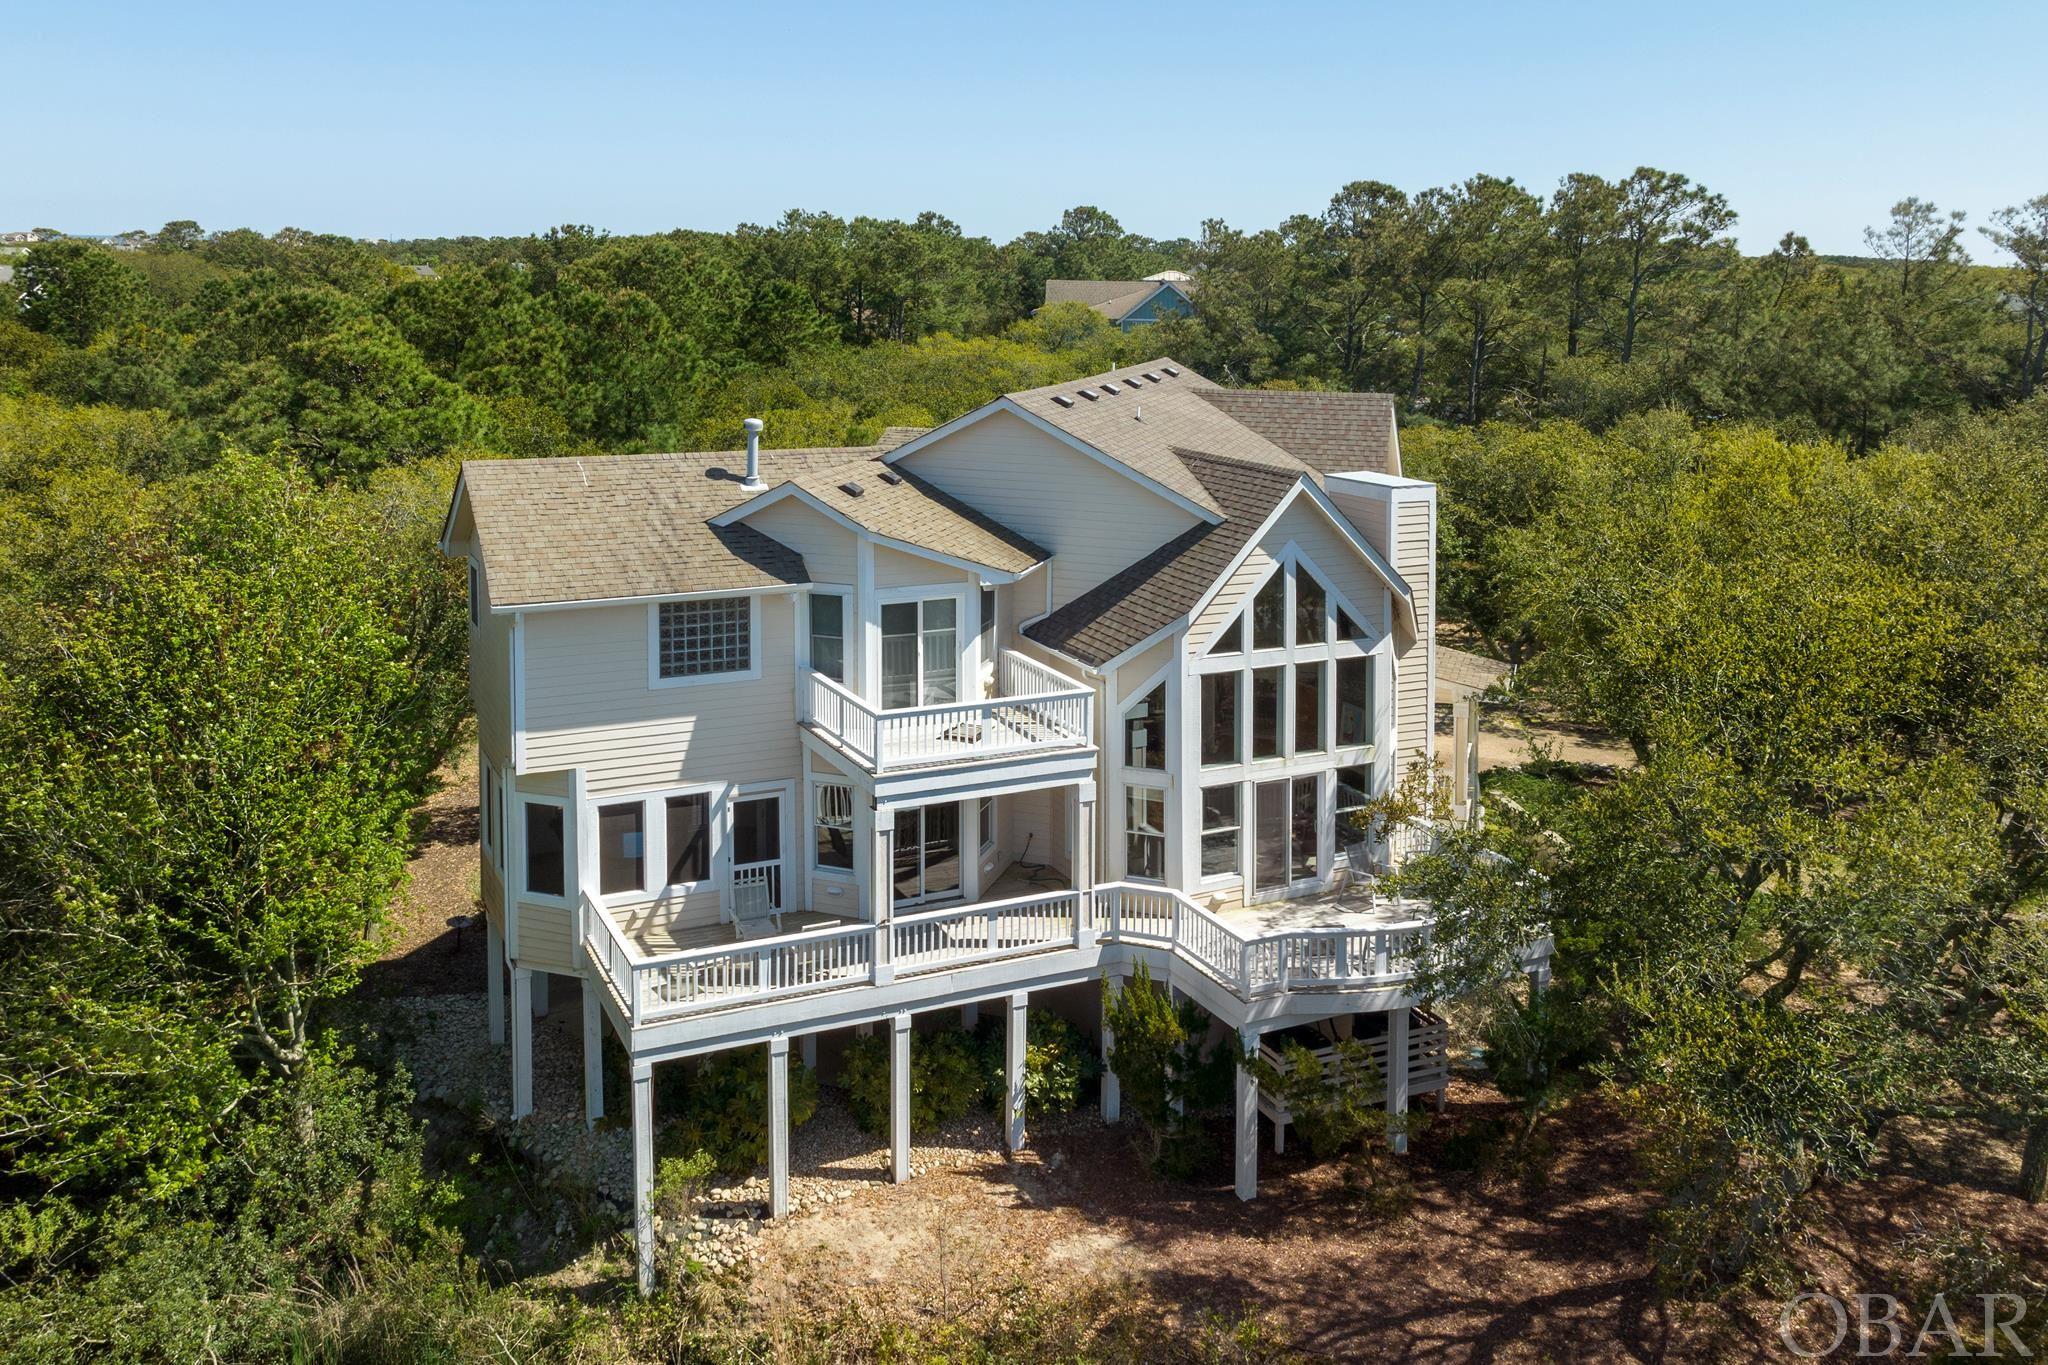 This semi-soundfront 5-bedroom, 4.5-bath residence (original owner and lovingly maintained) boasts a unique charm that sets it apart from other Outer Banks homes. The breathtaking vistas offered by this property are simply unparalleled. From the picturesque wooden bridge framing the tranquil Currituck Sound, to the west-facing wall adorned with cathedral windows that perfectly capture this serene scene, every aspect of this home exudes elegance and tranquility.  Nestled amongst majestic mature live oaks on a private lot, this residence stands as a tranquil haven. An elevator serves all three floors, ensuring convenience and accessibility. Upon stepping inside, you'll be transported to a world of serenity and sophistication.  The panoramic views from this property are truly awe-inspiring, showcasing both the enchanting sound and the meticulously designed Rees Jones Golf Course of The Currituck Club. Whether you're drawn to the captivating sunsets, the joys of birdwatching, or simply yearn for a place of relaxation, this home offers it all.  The main level features a delightful, updated kitchen and open living spaces strategically designed to maximize these breathtaking views. The expansive windows seamlessly blend the outdoor beauty with the indoor elegance, allowing you to savor every moment within this picturesque setting. The generously sized bedrooms ensure the utmost comfort.  Outside, the beauty of this property continues, offering ample space for sitting and immersing yourself in the great outdoors. If your dreams include a private pool oasis, you're in luck; the generous lot size can accommodate your vision.  This is an extraordinary opportunity to make this remarkable property your own, a rare combination of natural beauty, modern comfort, and endless possibilities. Don't let this Currituck Club gem slip through your fingers—schedule a visit today!